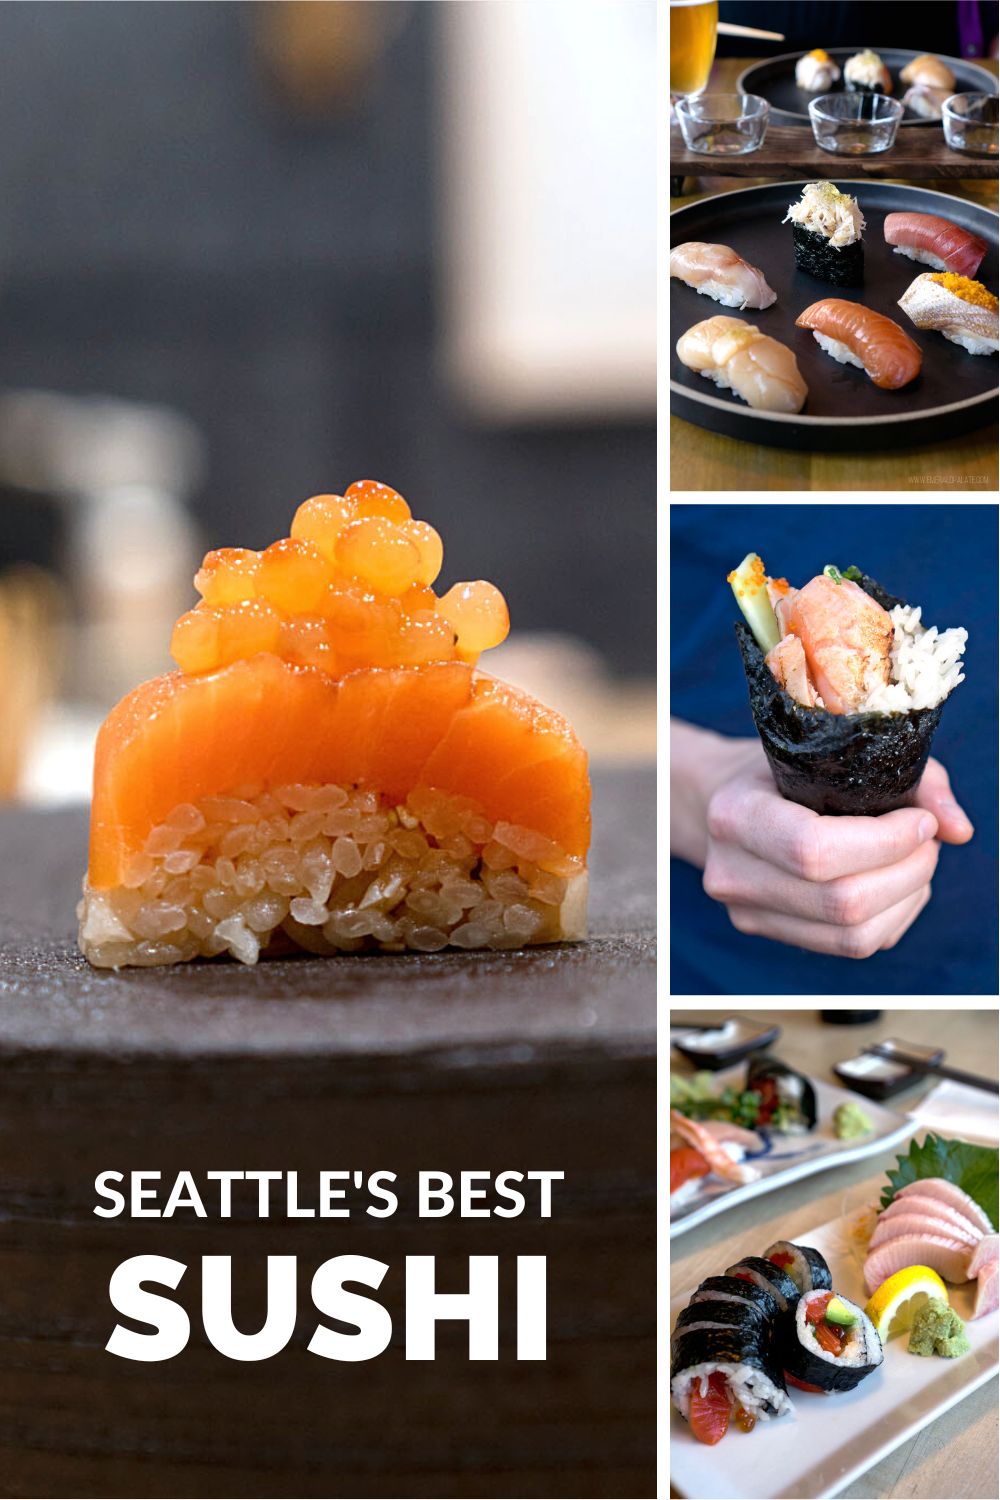 Roundup of the best sushi restaurants in Seattle, including omakase and kaiseki sushi bars, cheap sushi spots, and casual sushi joints perfect for a weeknight meal in Seattle.